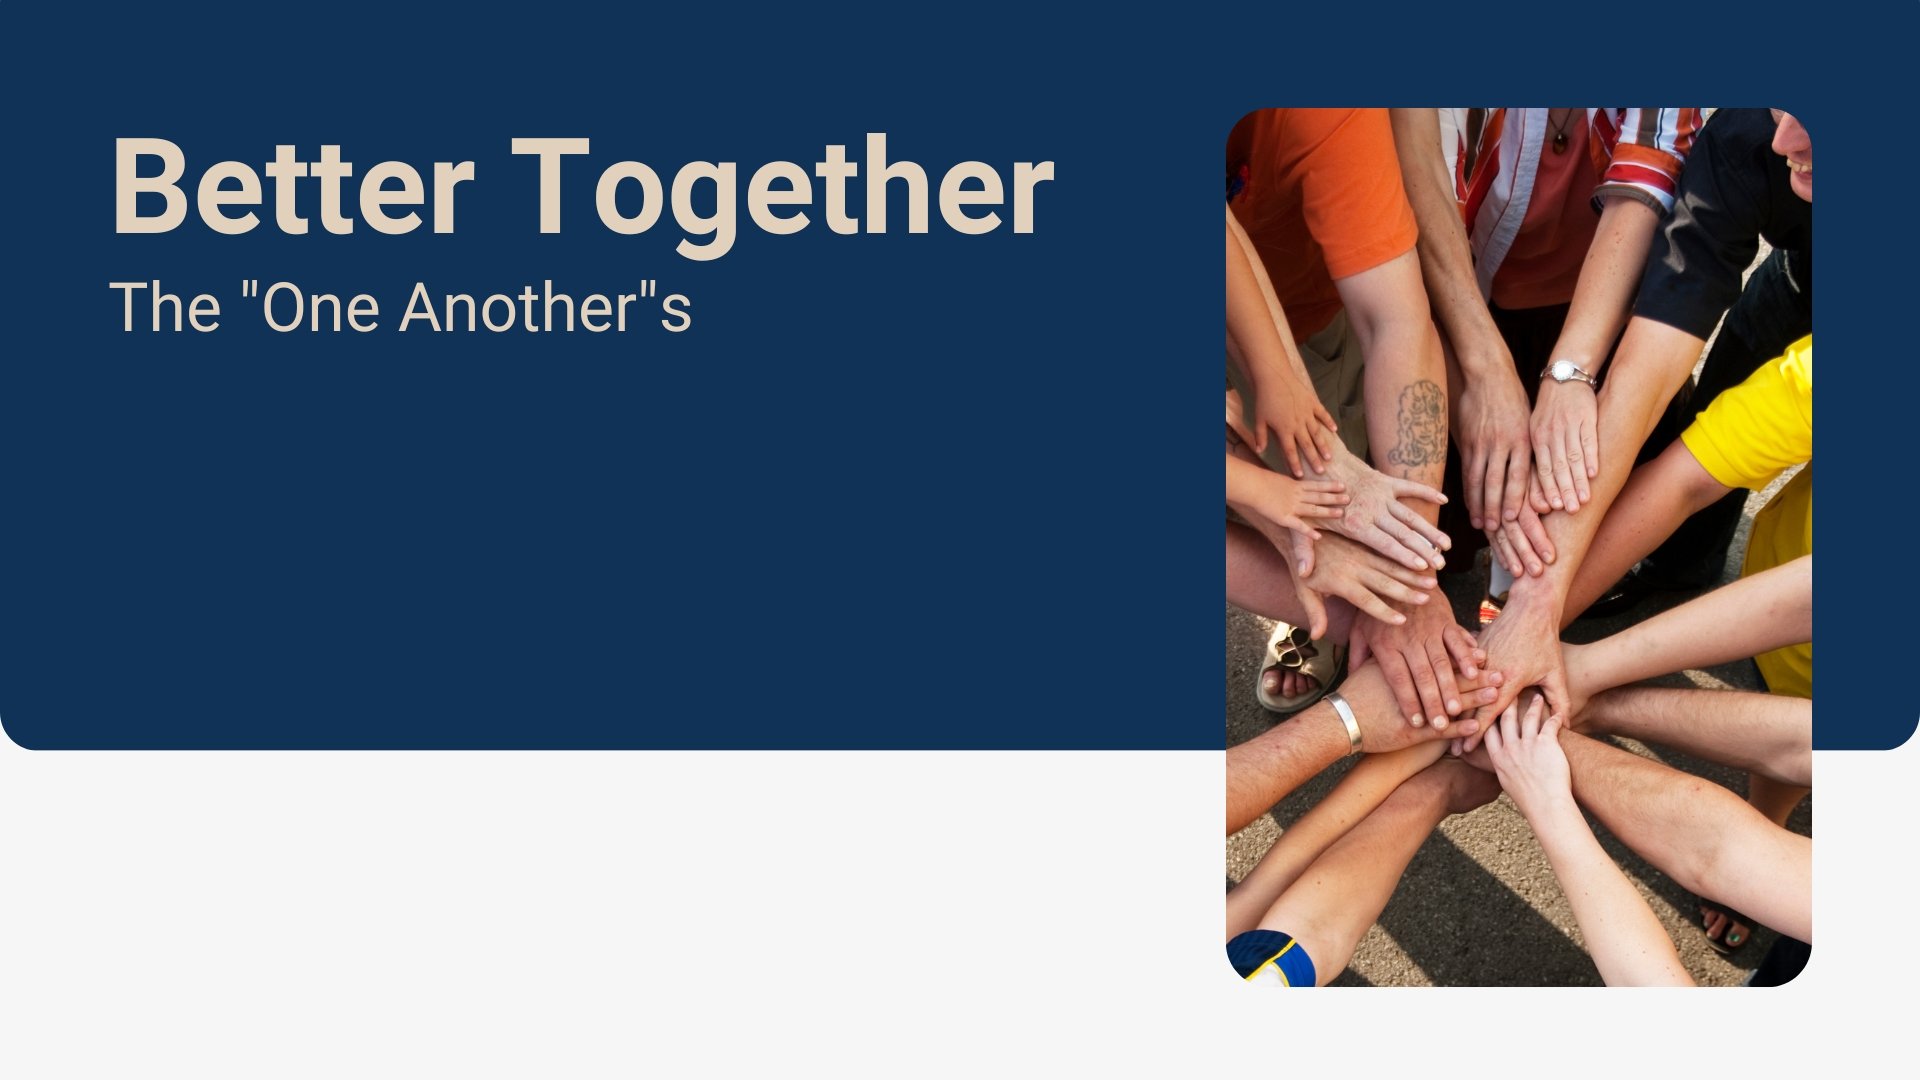 Better Together: The "One Another's"